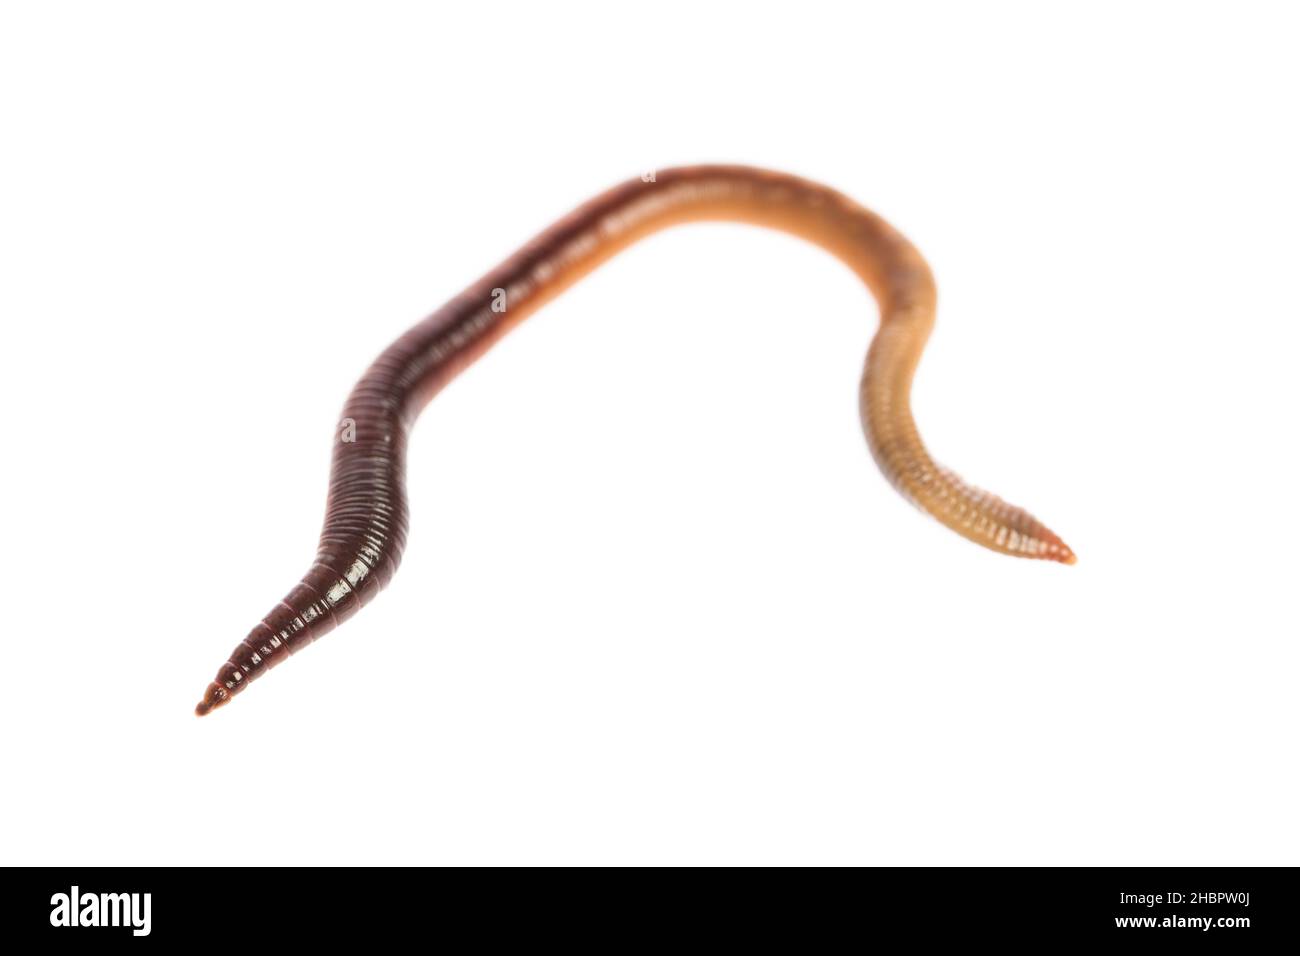 Earth worms crop Cut Out Stock Images & Pictures - Alamy